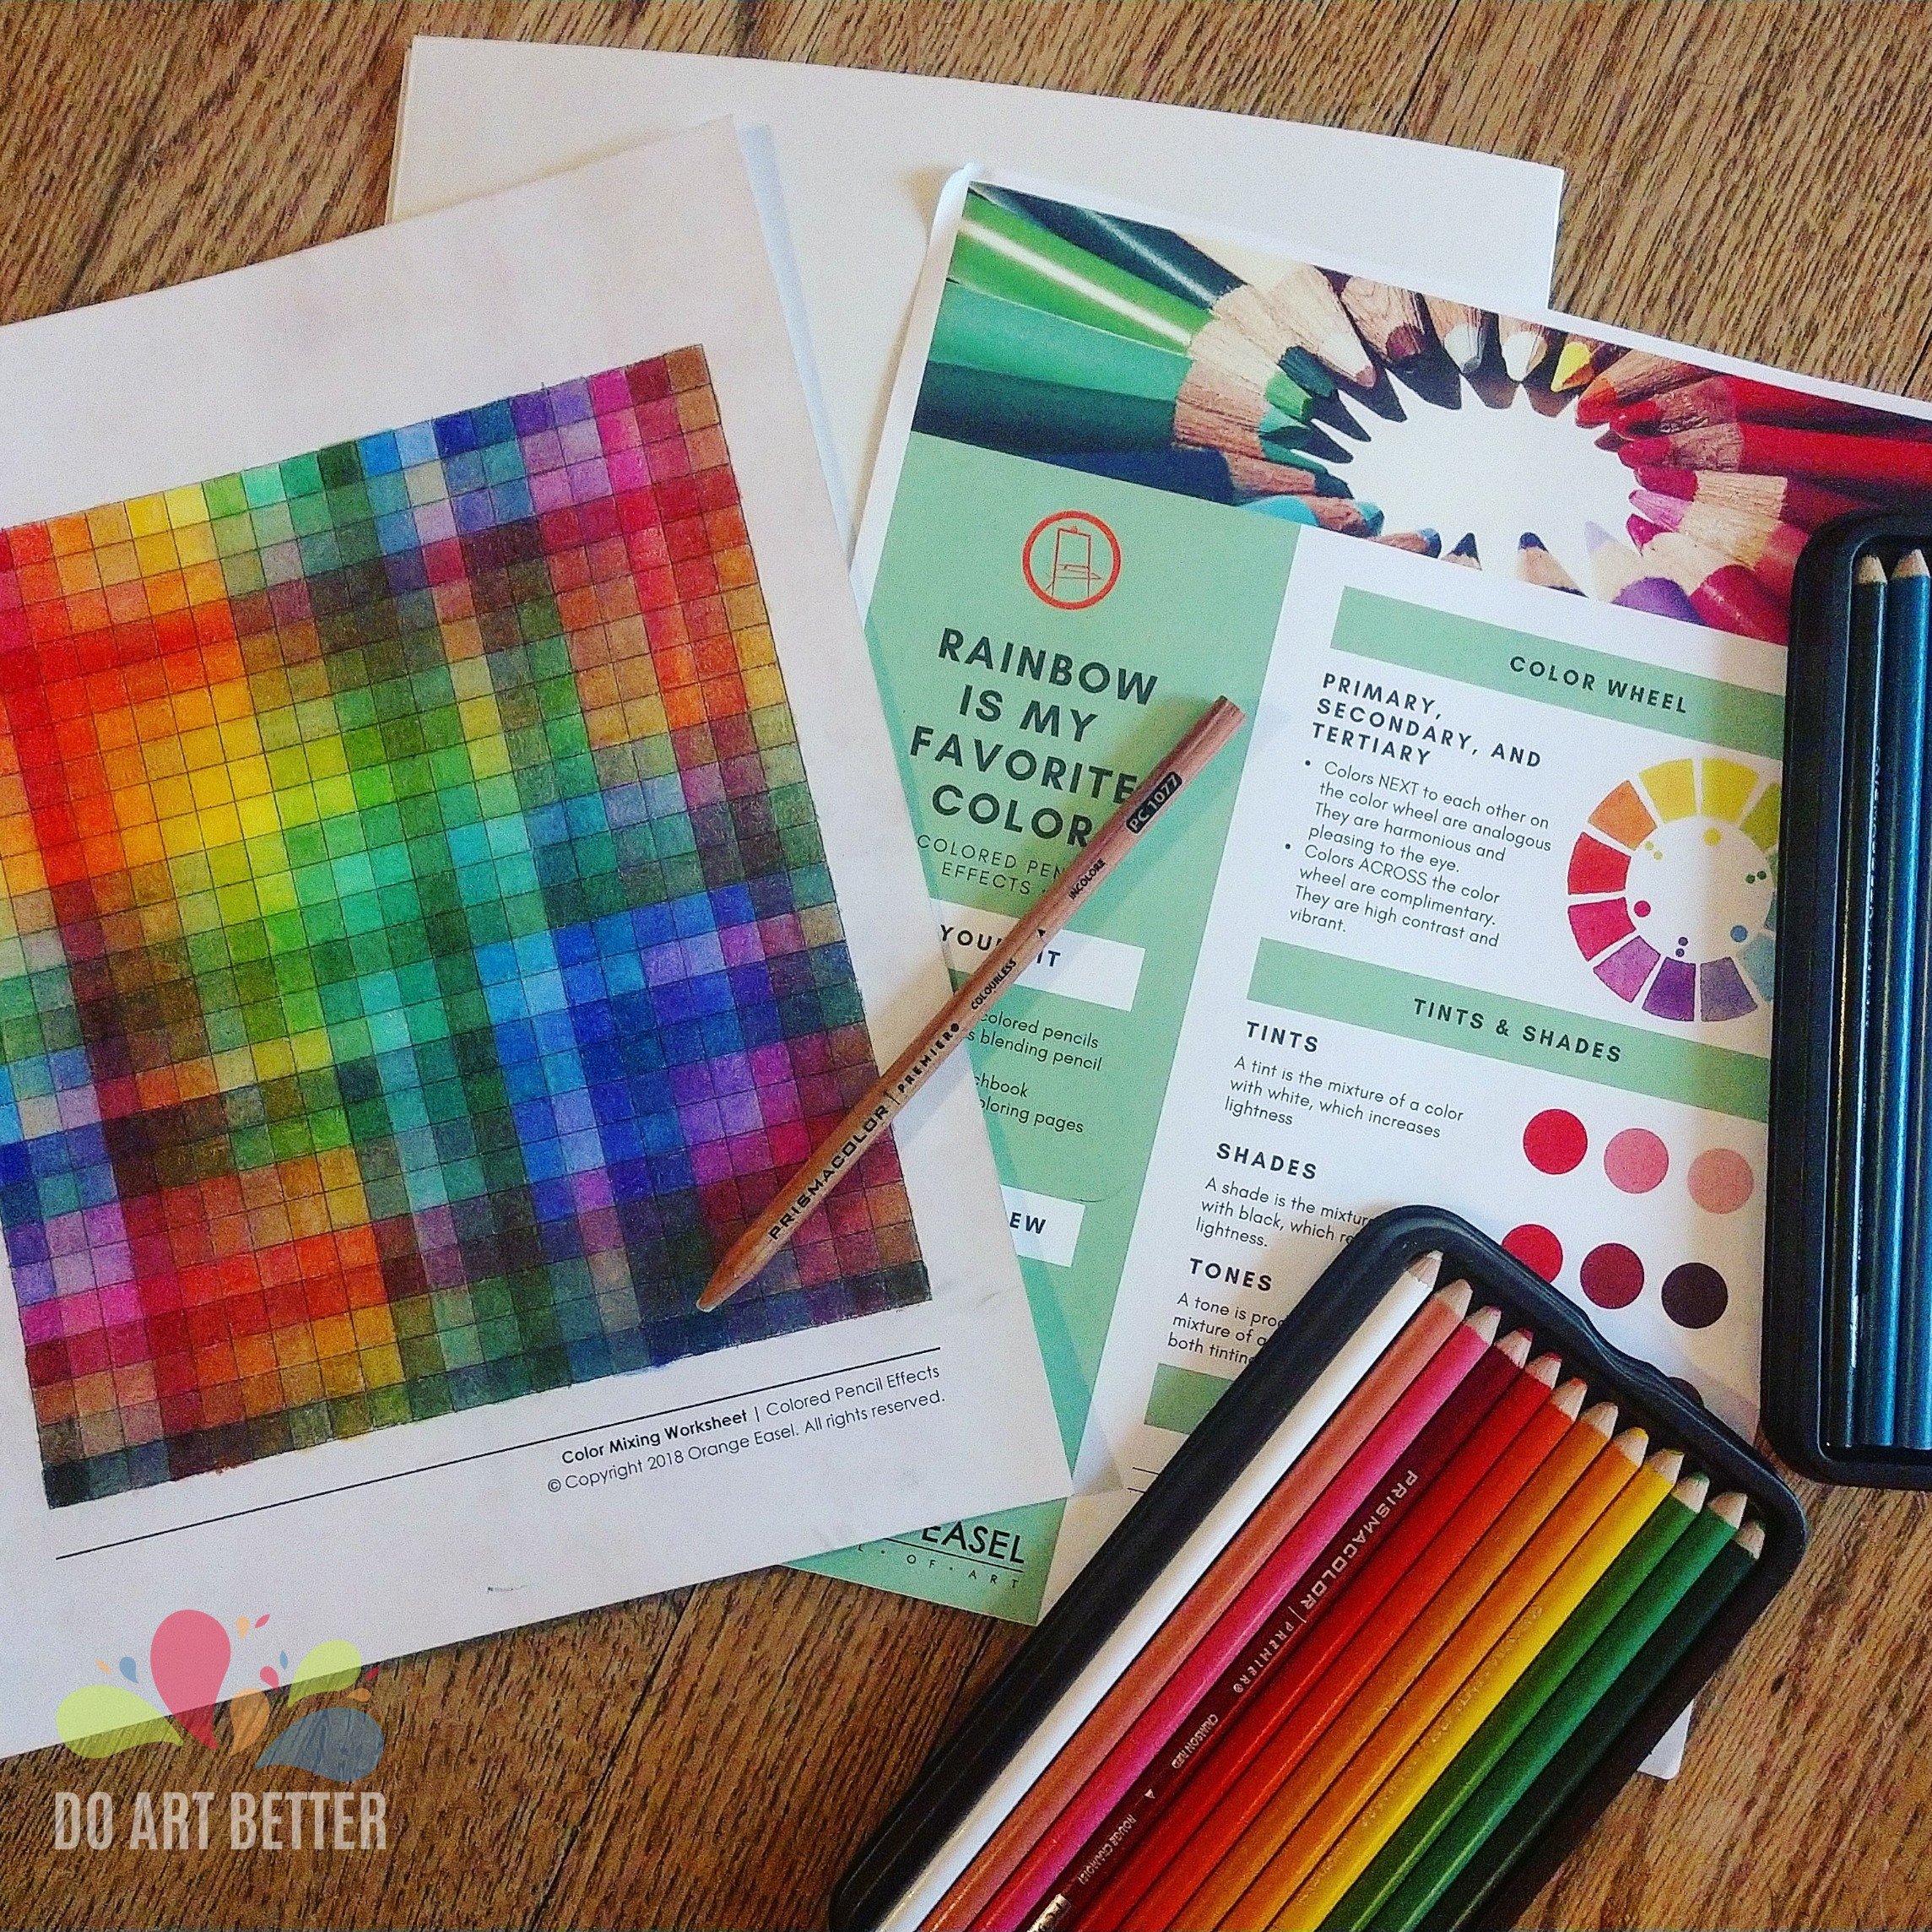 Colored pencil techniques and exercises. This exercise is a great way to practice your blending in a relaxing way and end up with a handy color-mixing reference sheet!